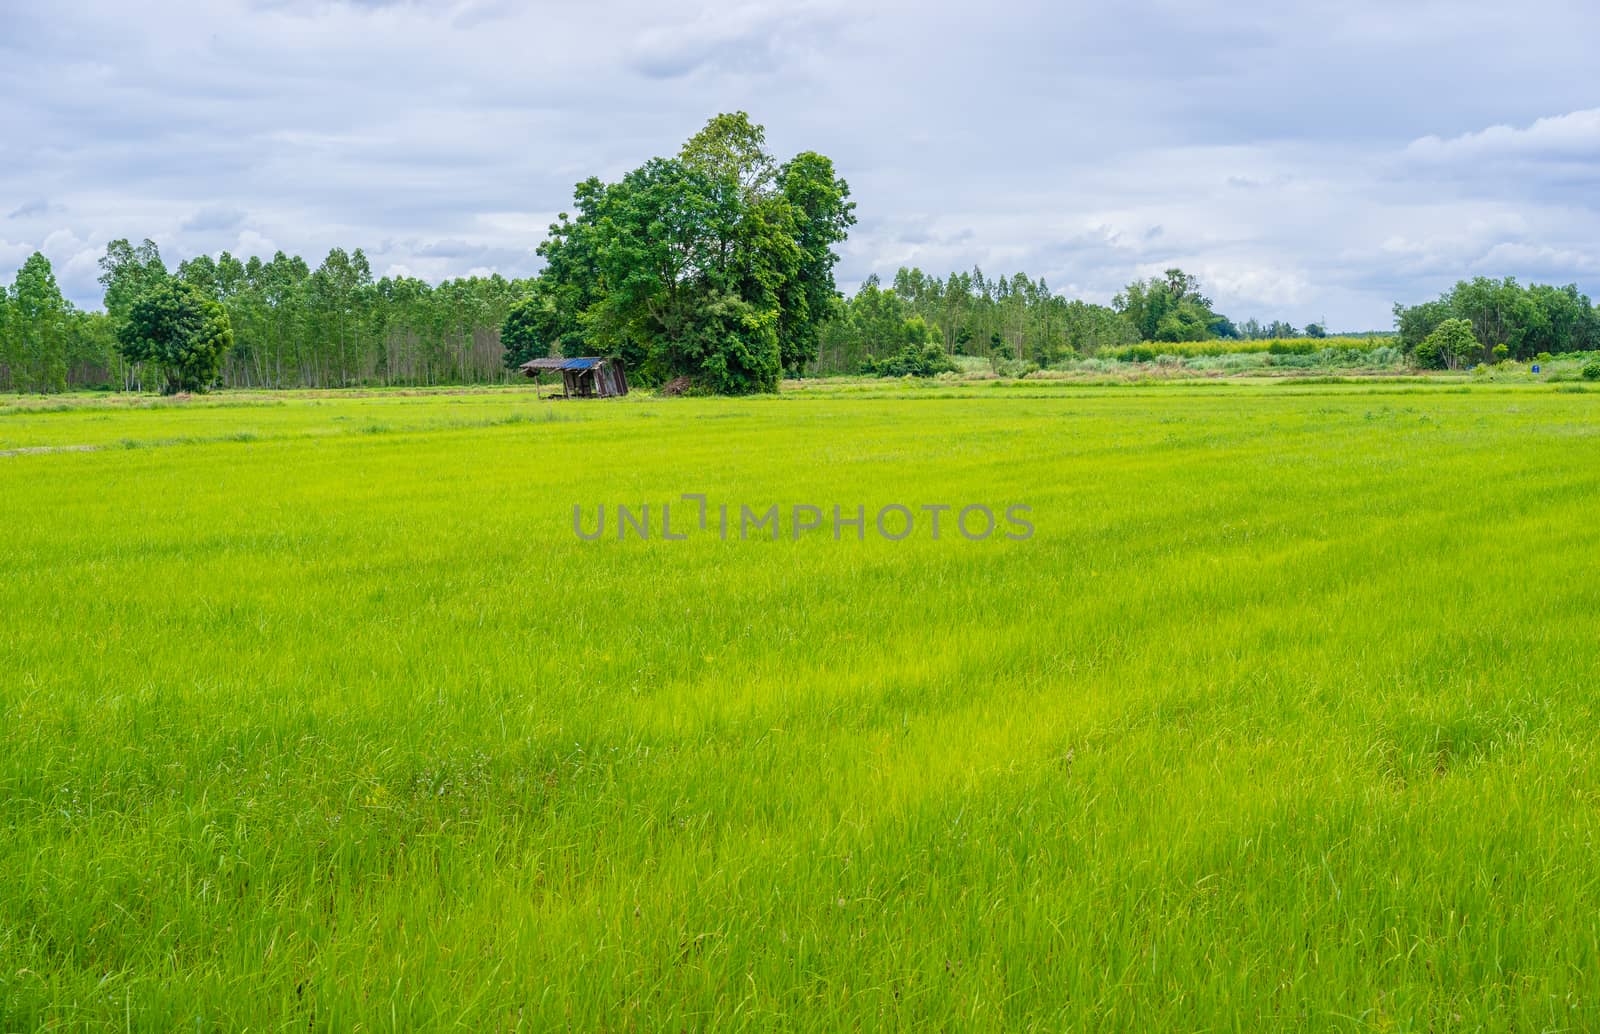 Hut and tree in rice green field in countryside